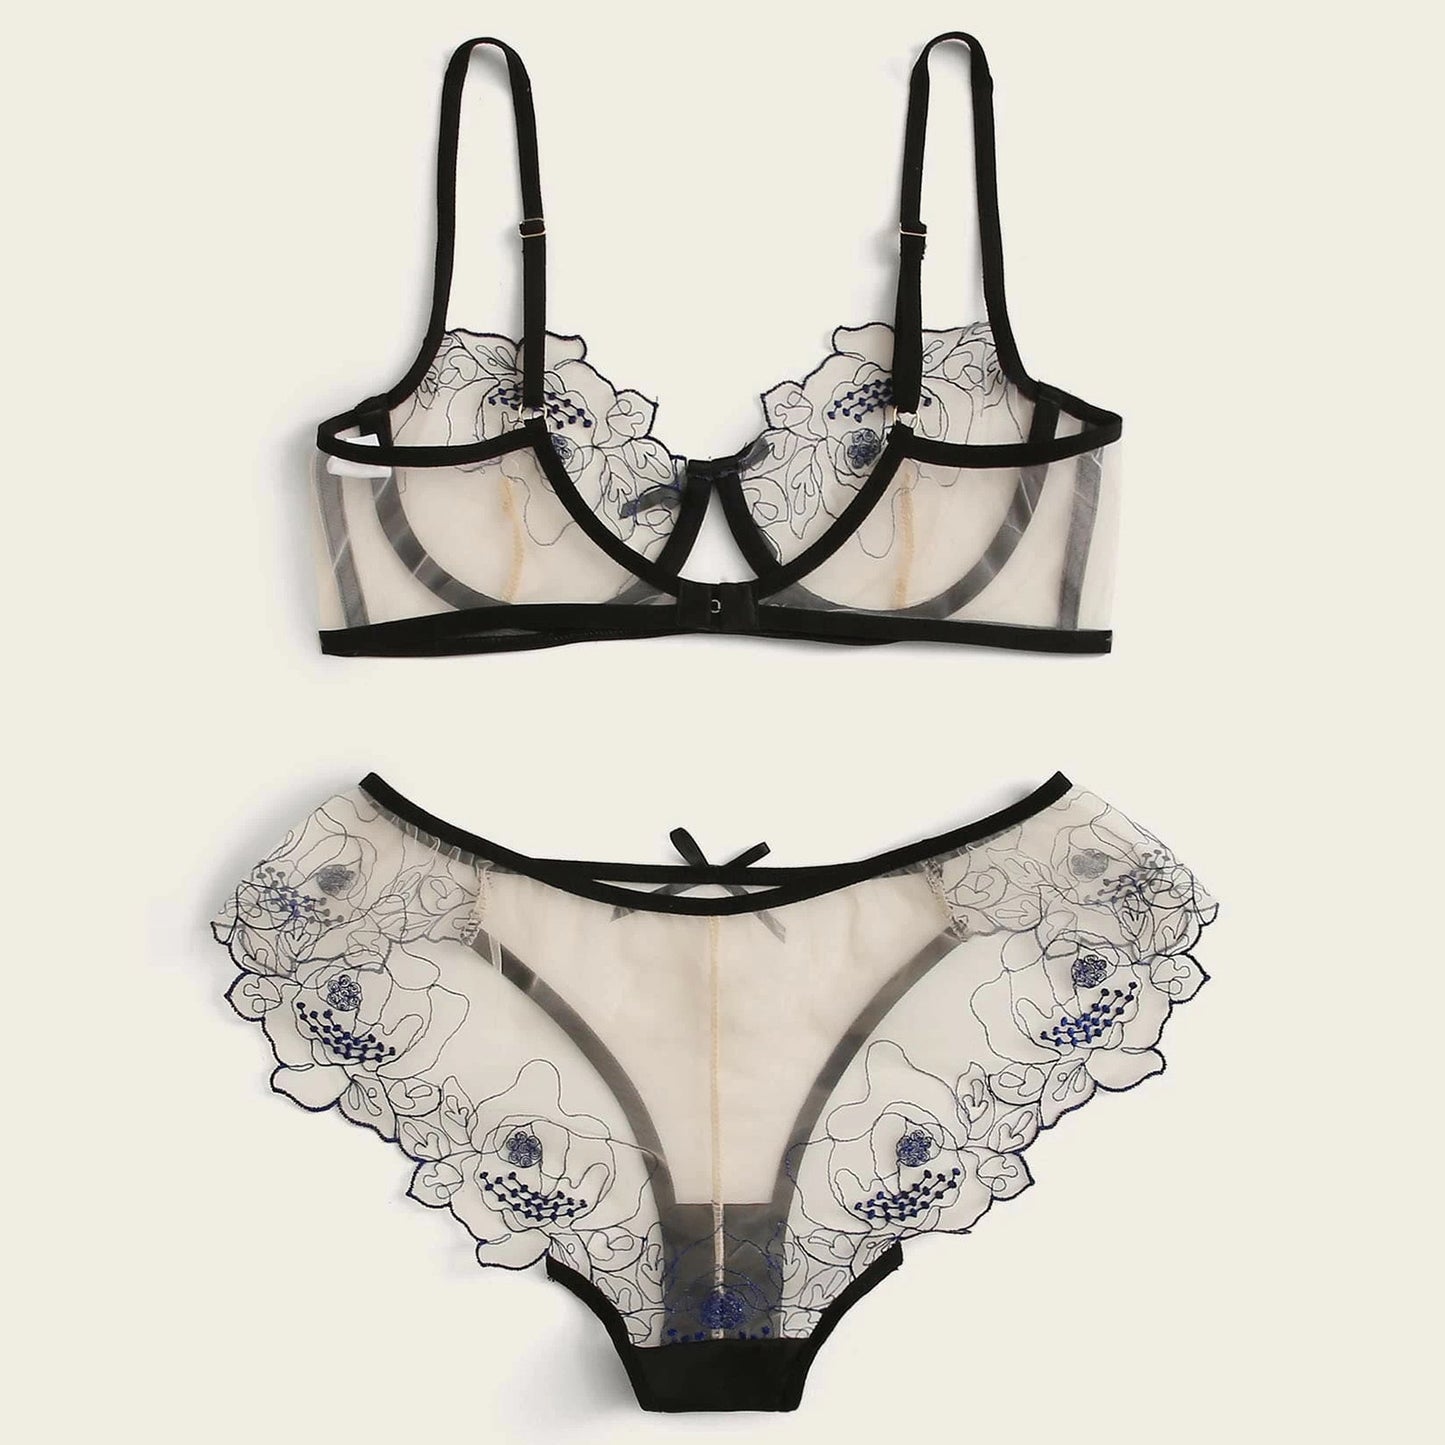 Buy Online Premimum Quality, Trendy and Highly Comfortable Mesh Embroidered Sheer Lingerie Set - FEYONAS